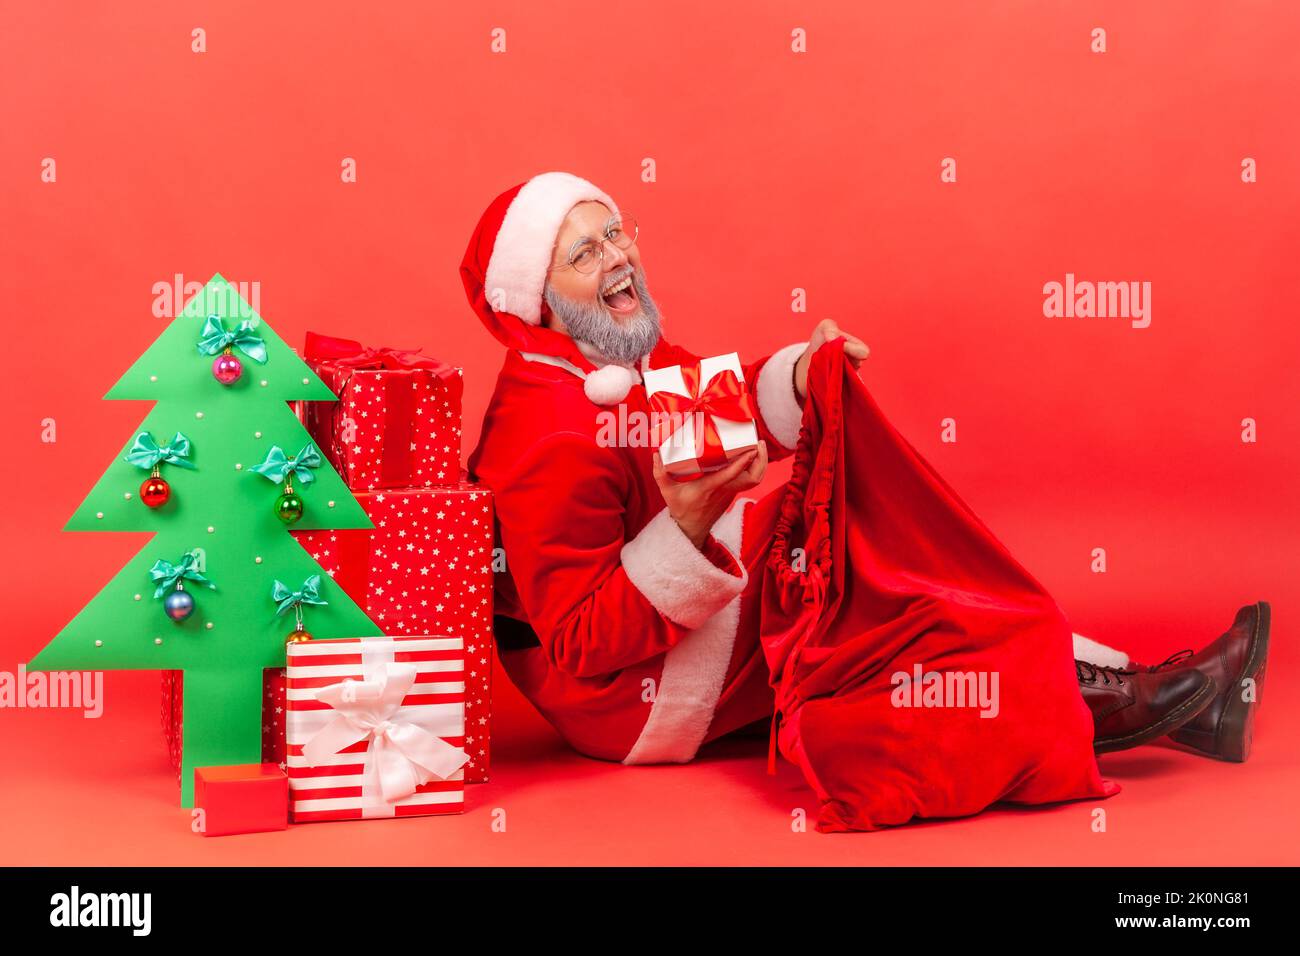 Happy positive elderly man with gray beard wearing santa claus costume with festive mood, taking present box from bag, looking at camera and smiling. Indoor studio shot isolated on red background. Stock Photo